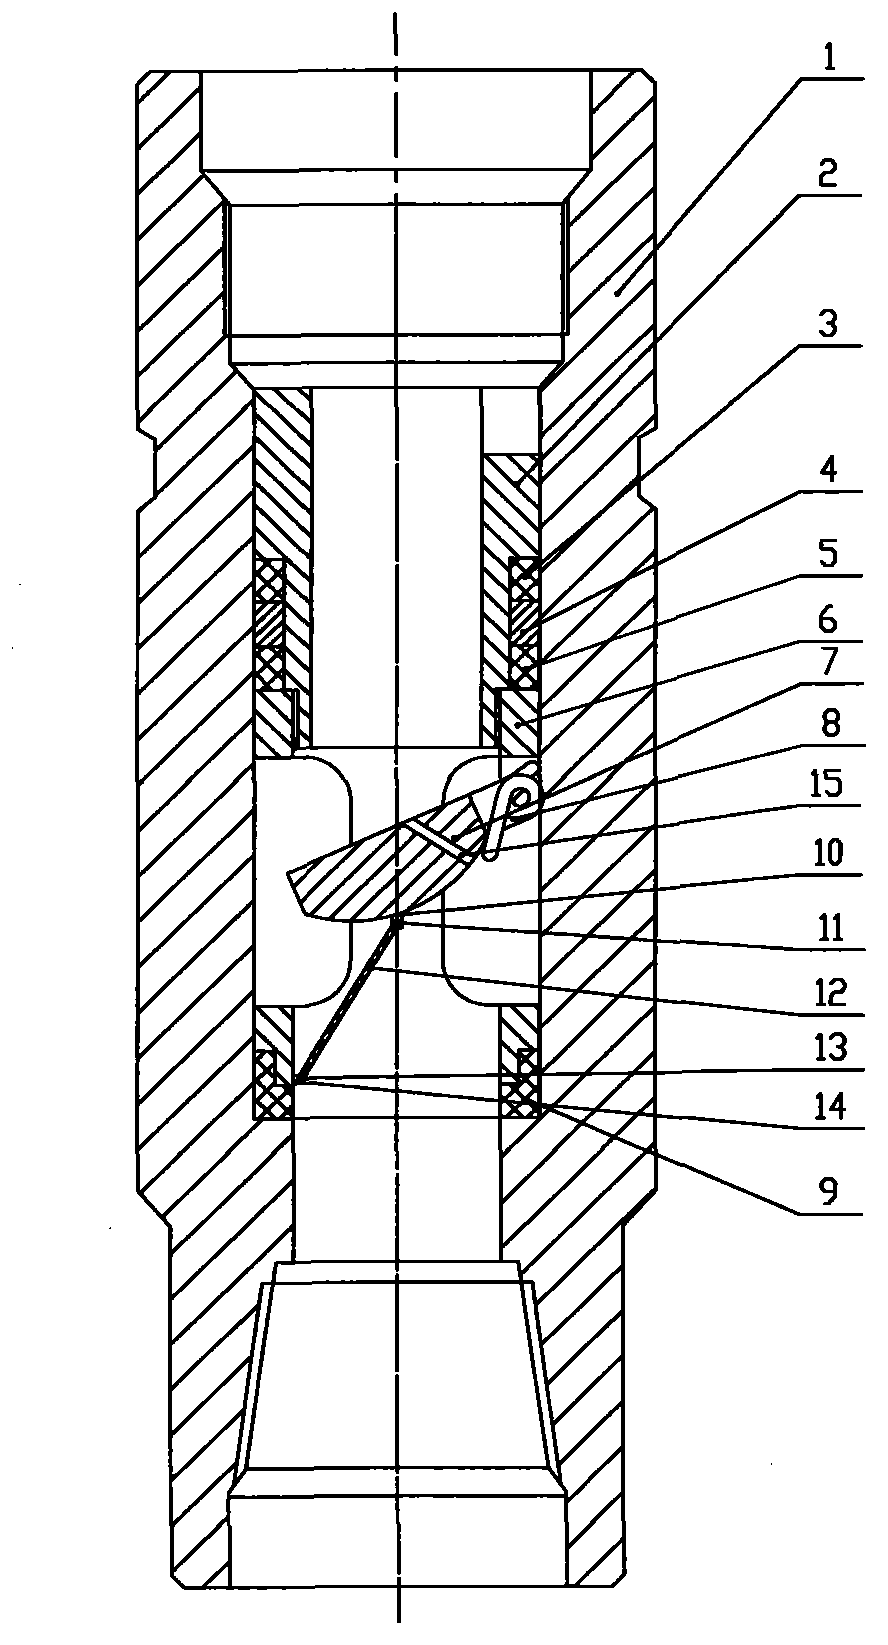 Pressure-transmitting pin snapping and fracturing automatic grouting valve float valve